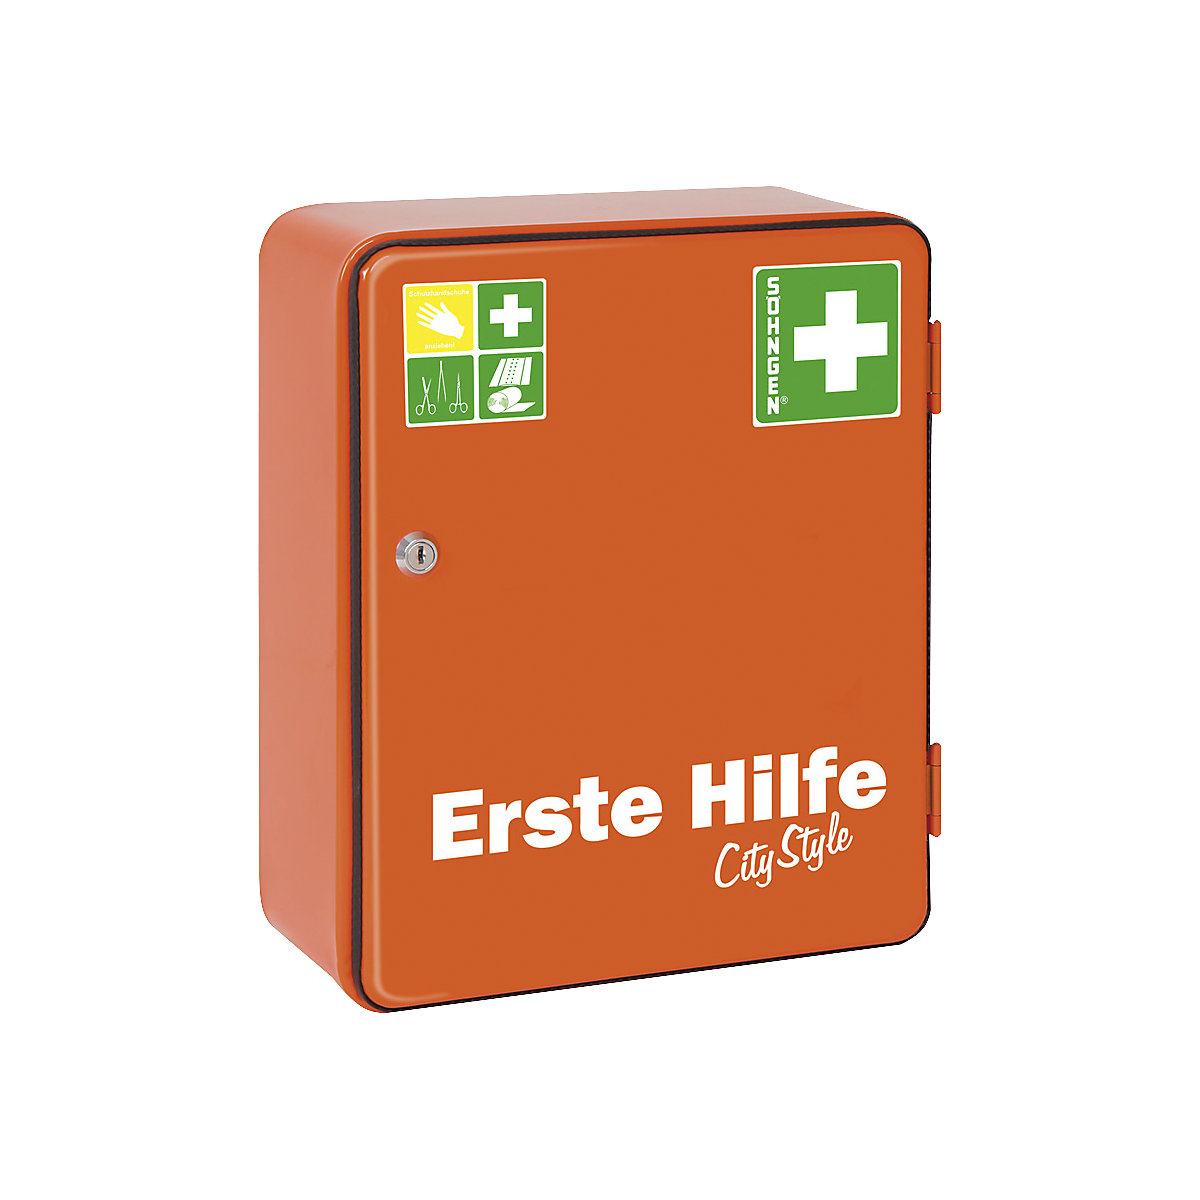 HEIDELBERG City Style first aid cabinet to DIN 13157 – SÖHNGEN (Product illustration 3)-2